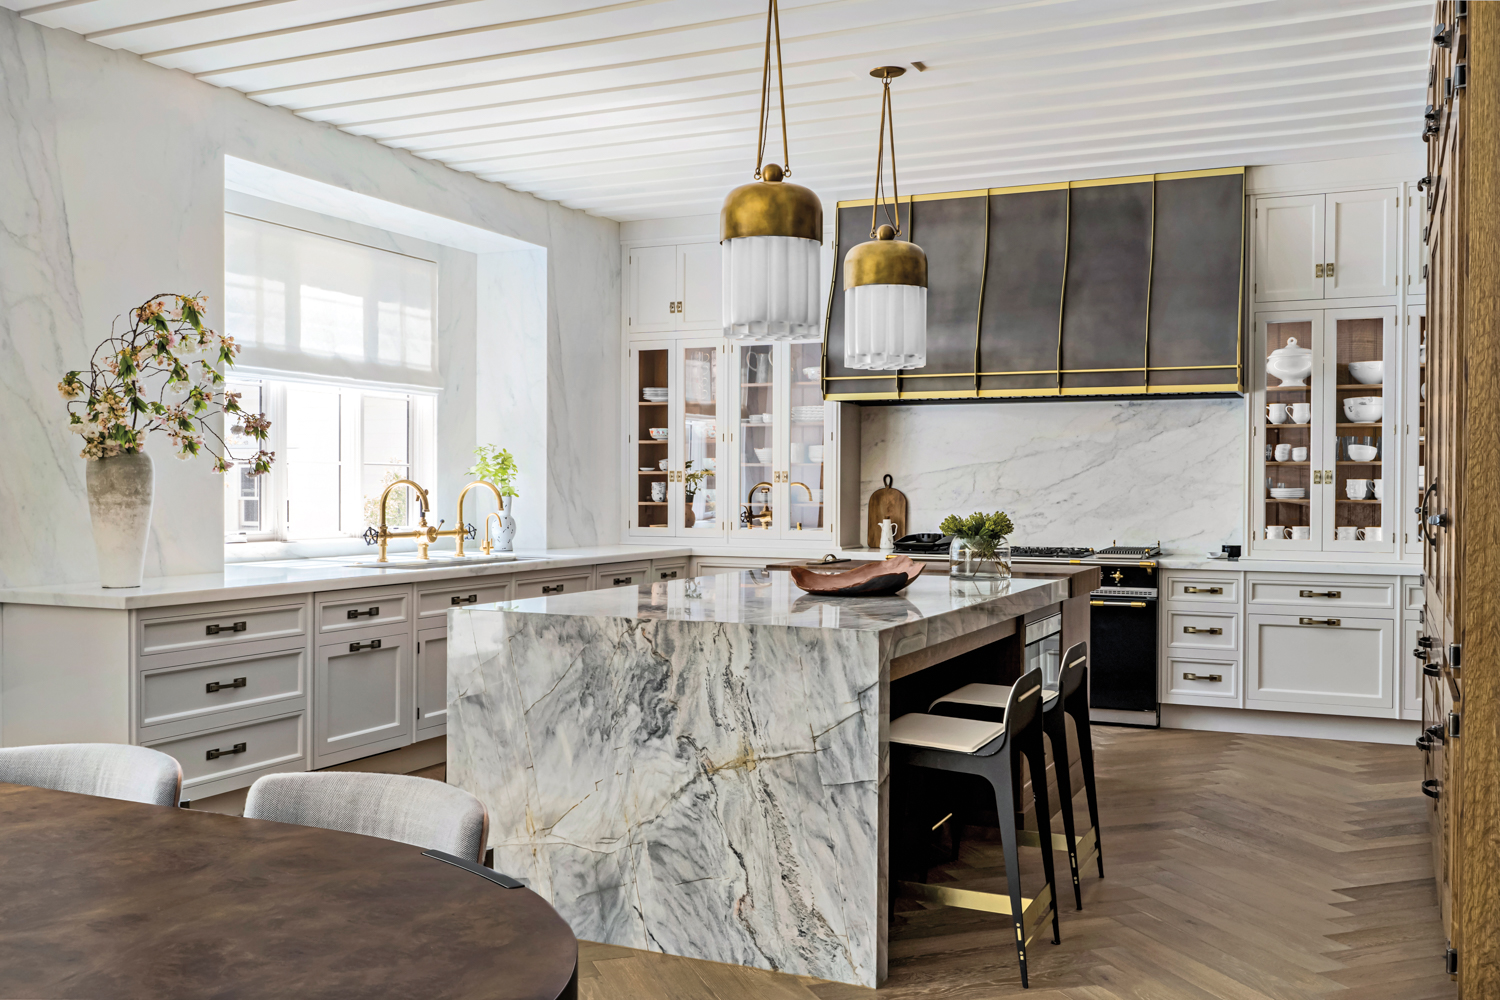 A quartzite countertop with strong veining covers the top and sides of the kitchen island.